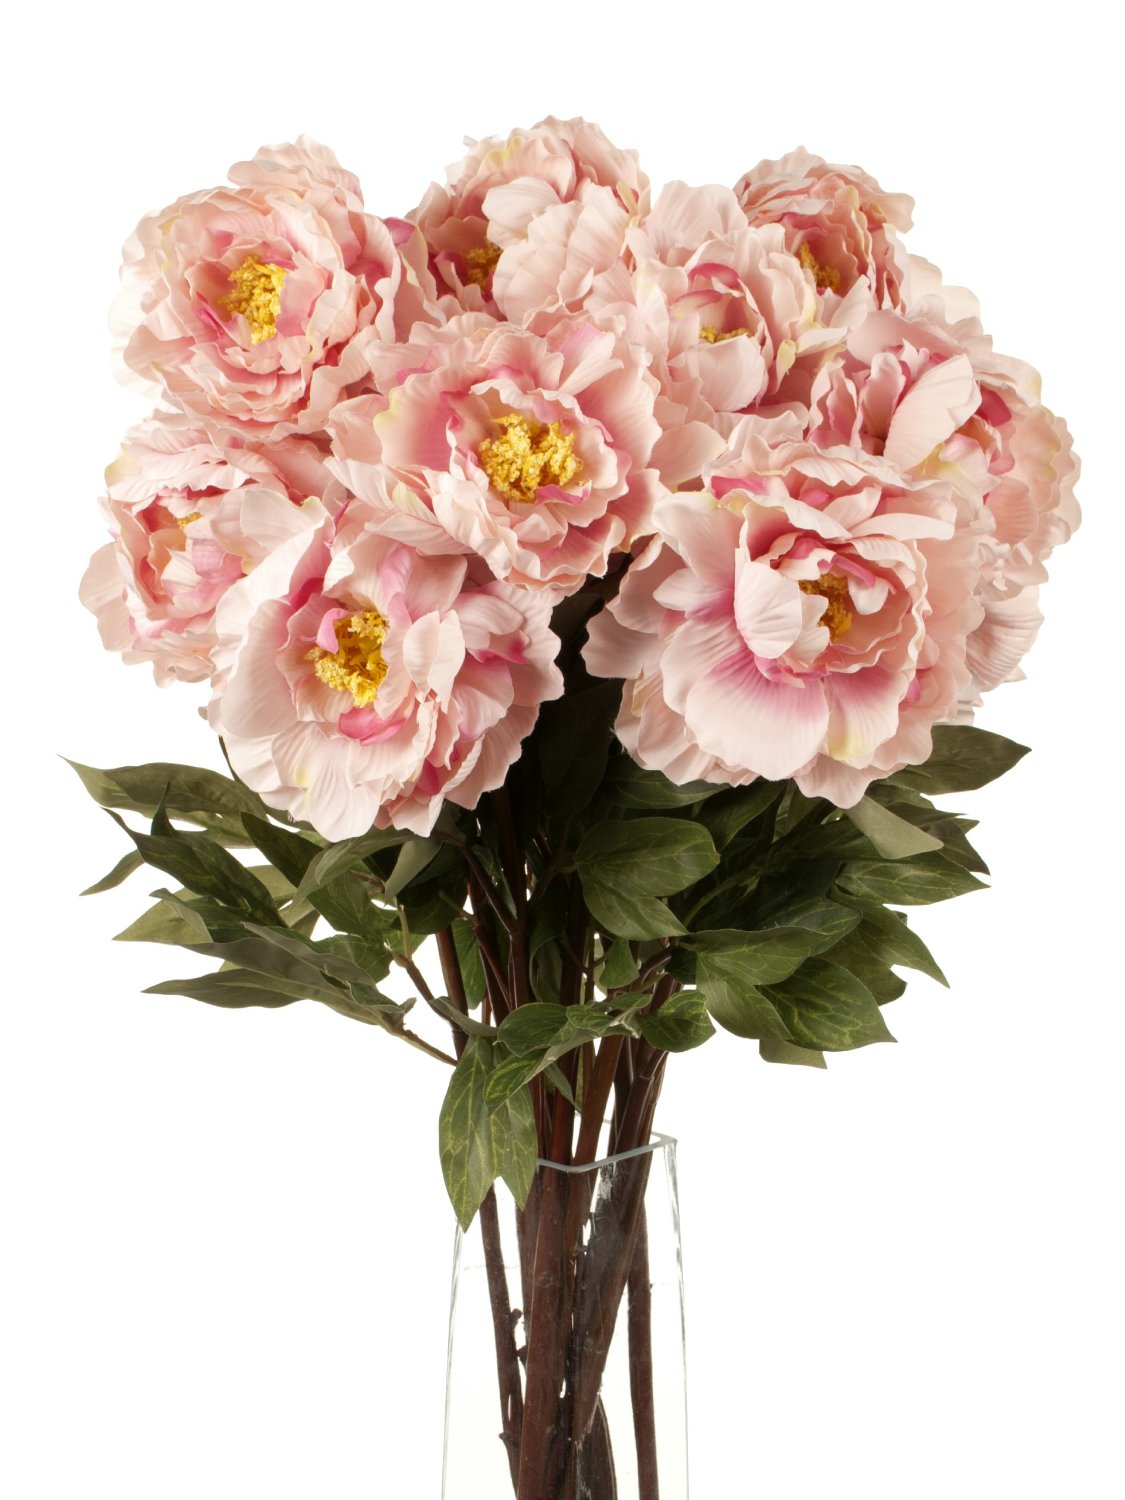 Top tips on buying silk flowers - The Artificial Flowers Company